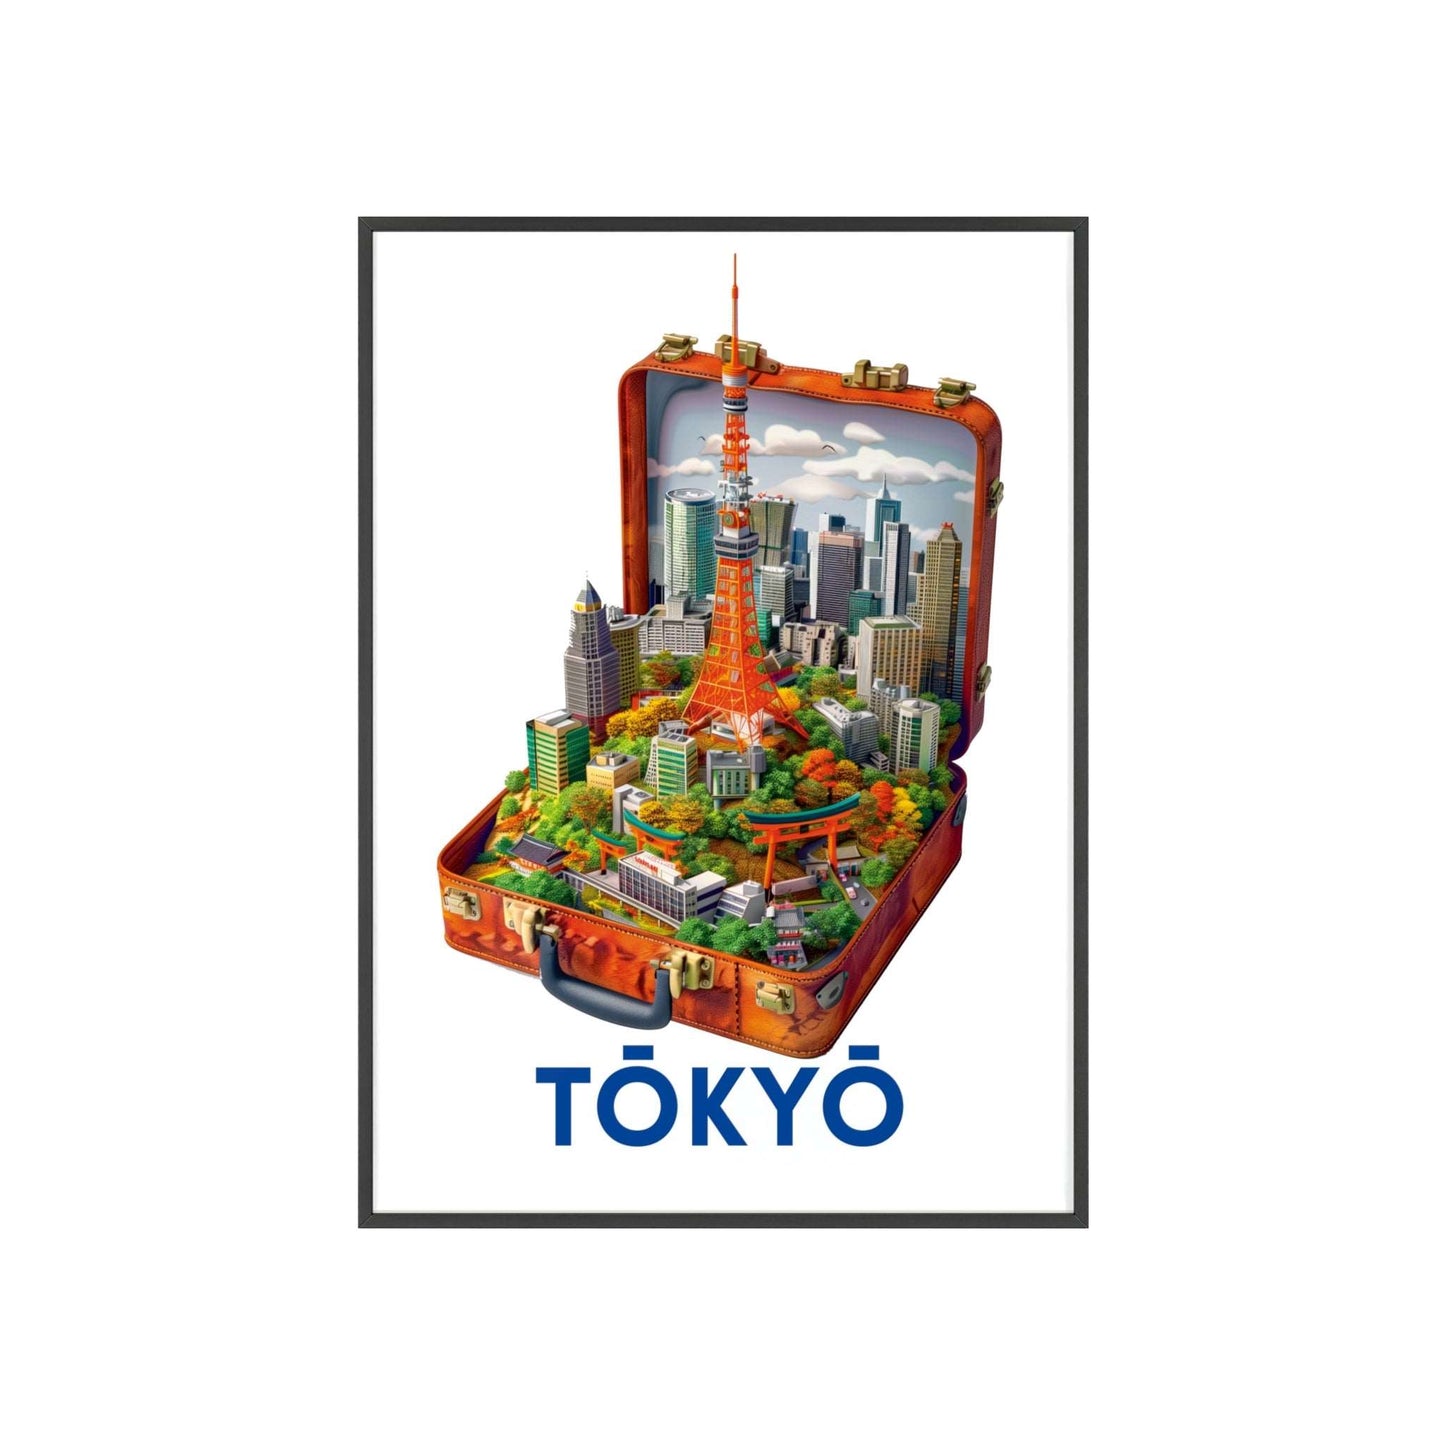 Travel poster titled "Tokio in a Suitcase" featuring a stylized illustration capturing the essence of Tokyo. The poster is designed for modern home decor.